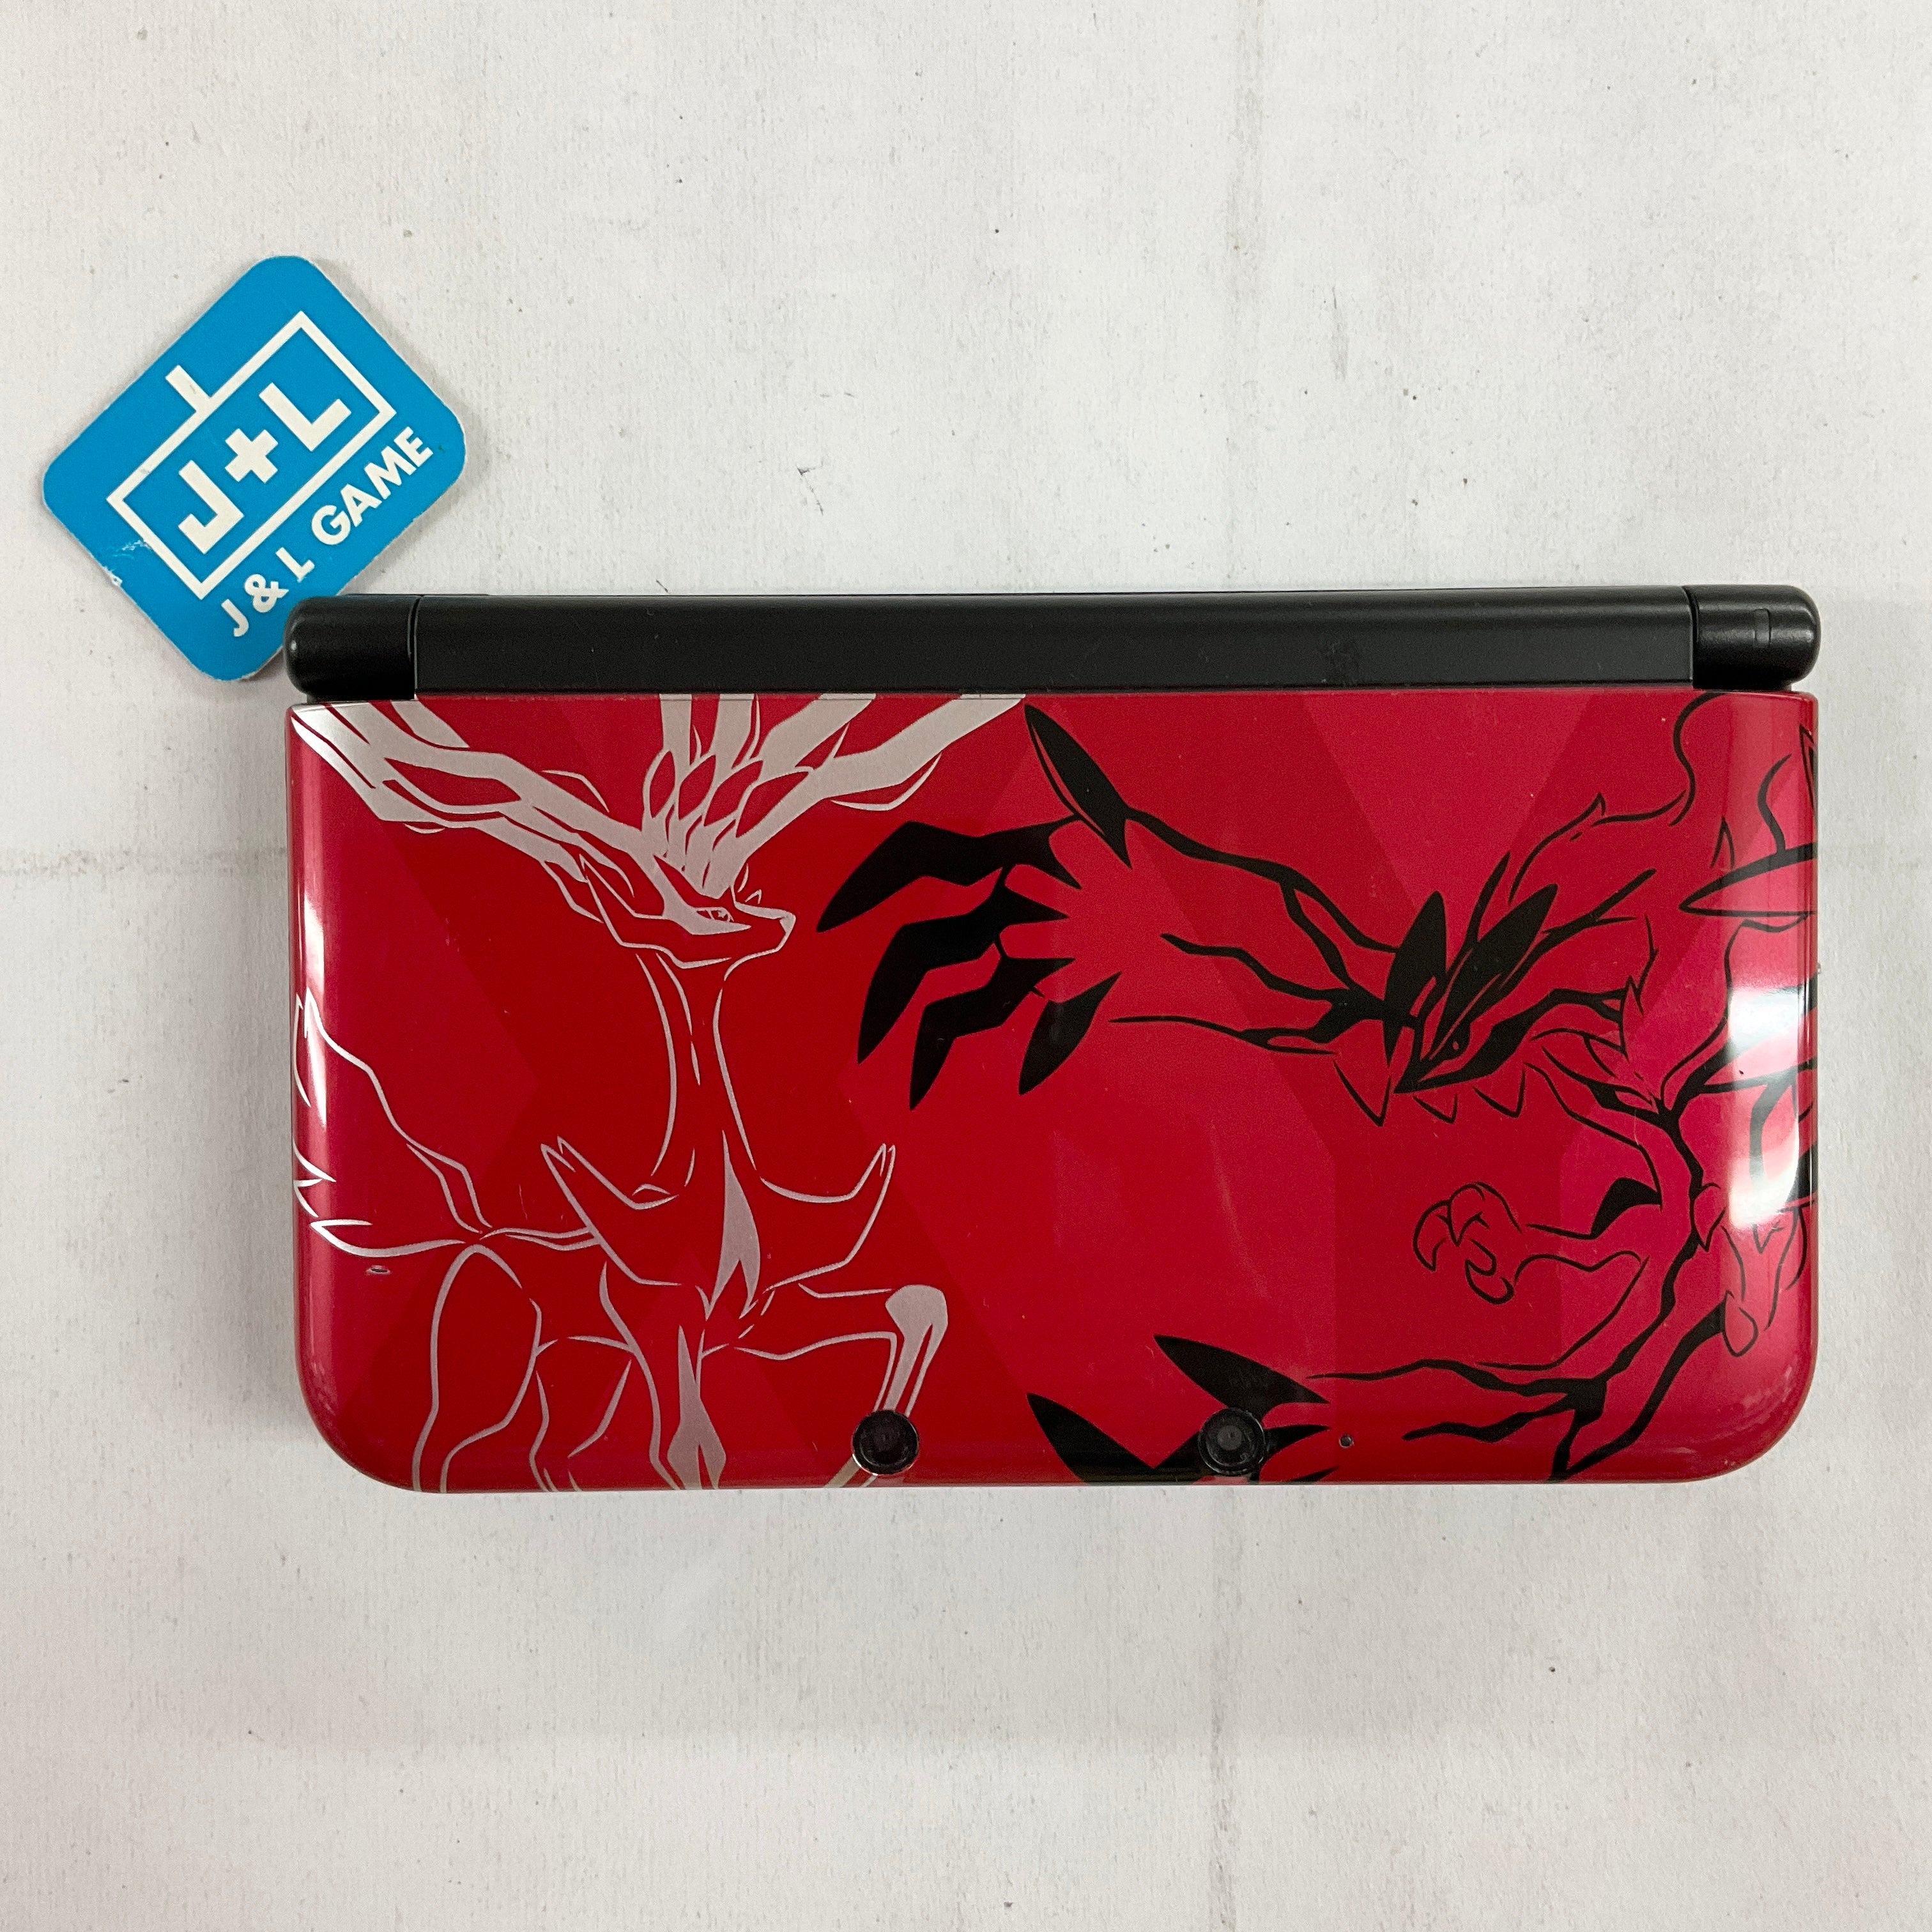 Nintendo 3DS XL (Pokemon XY Red) - Nintendo 3DS [Pre-Owned] Consoles Nintendo   